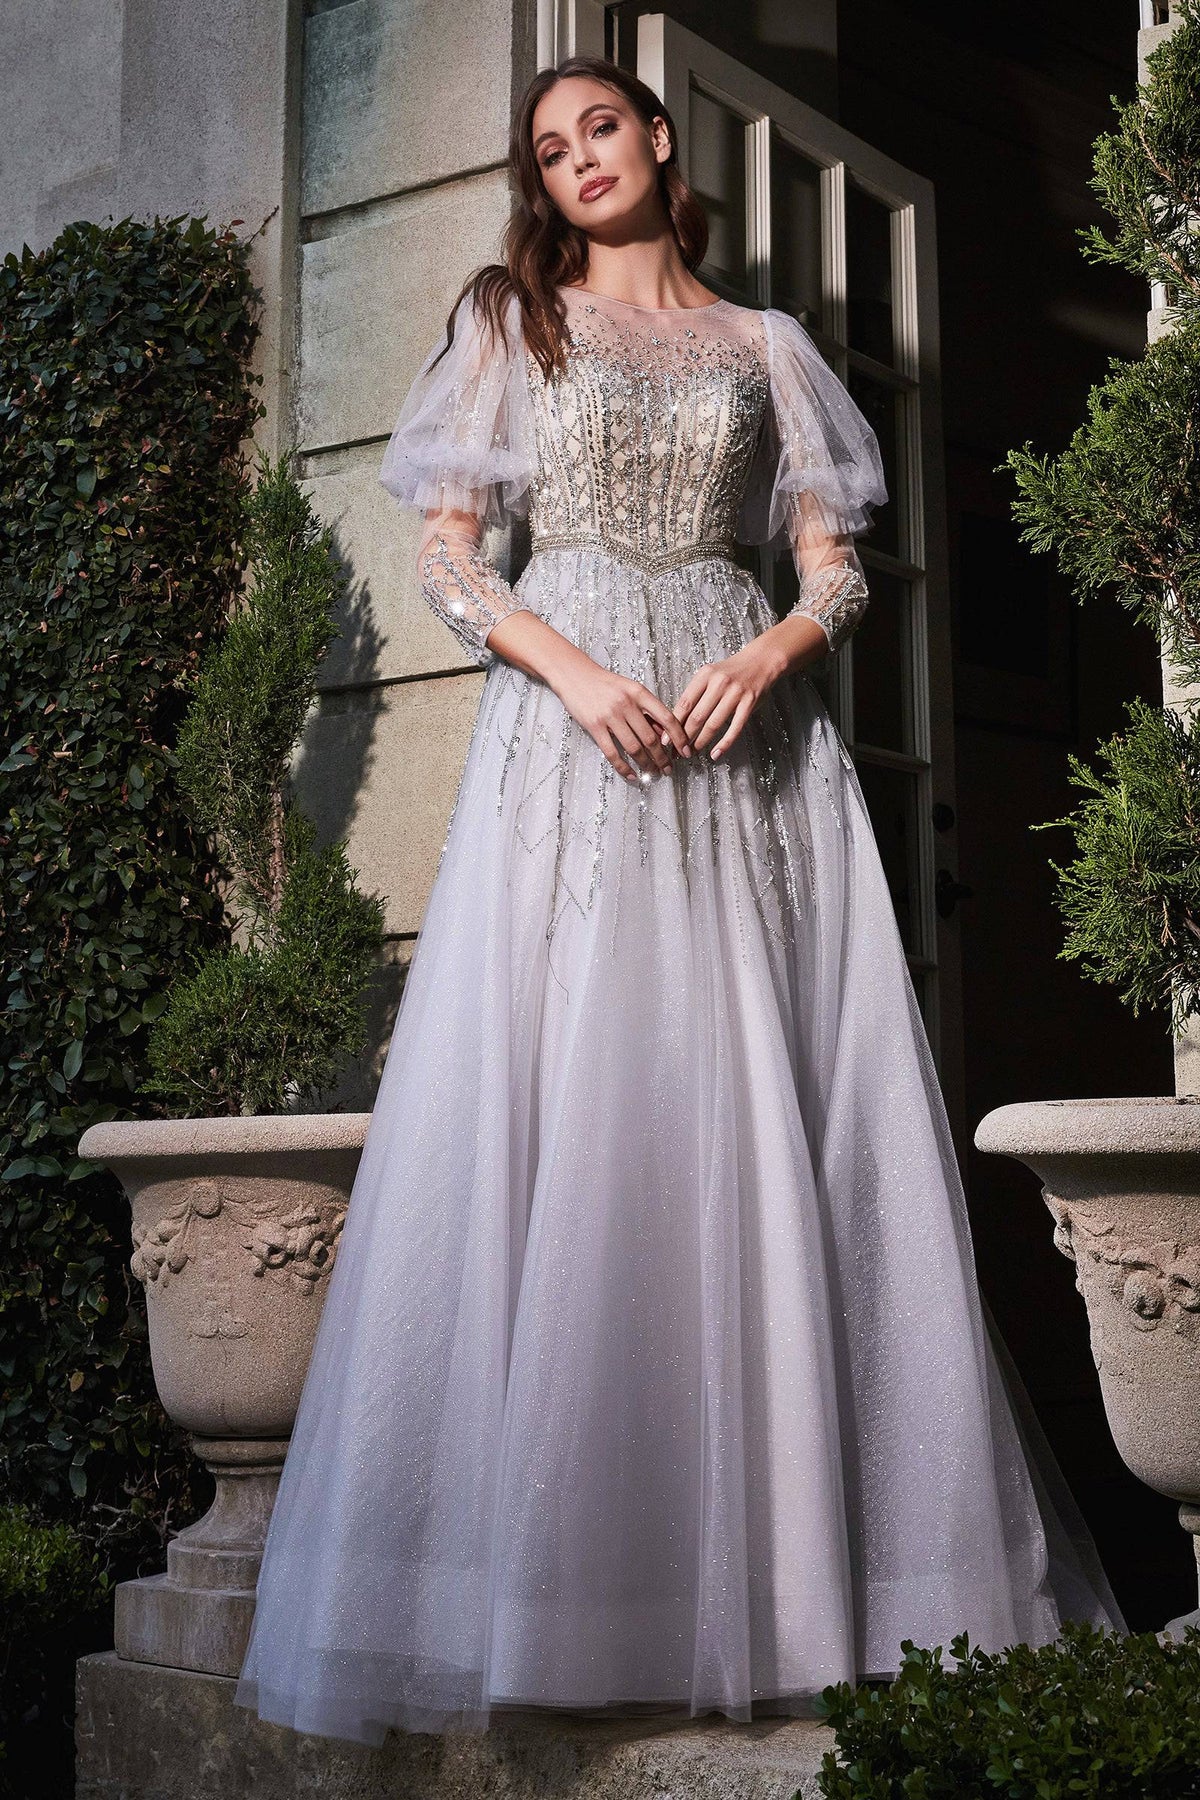 Princess-Like Puffy Sleeve Gown with Fitted Top and Embroidery Detailing #CDB707 - NORMA REED